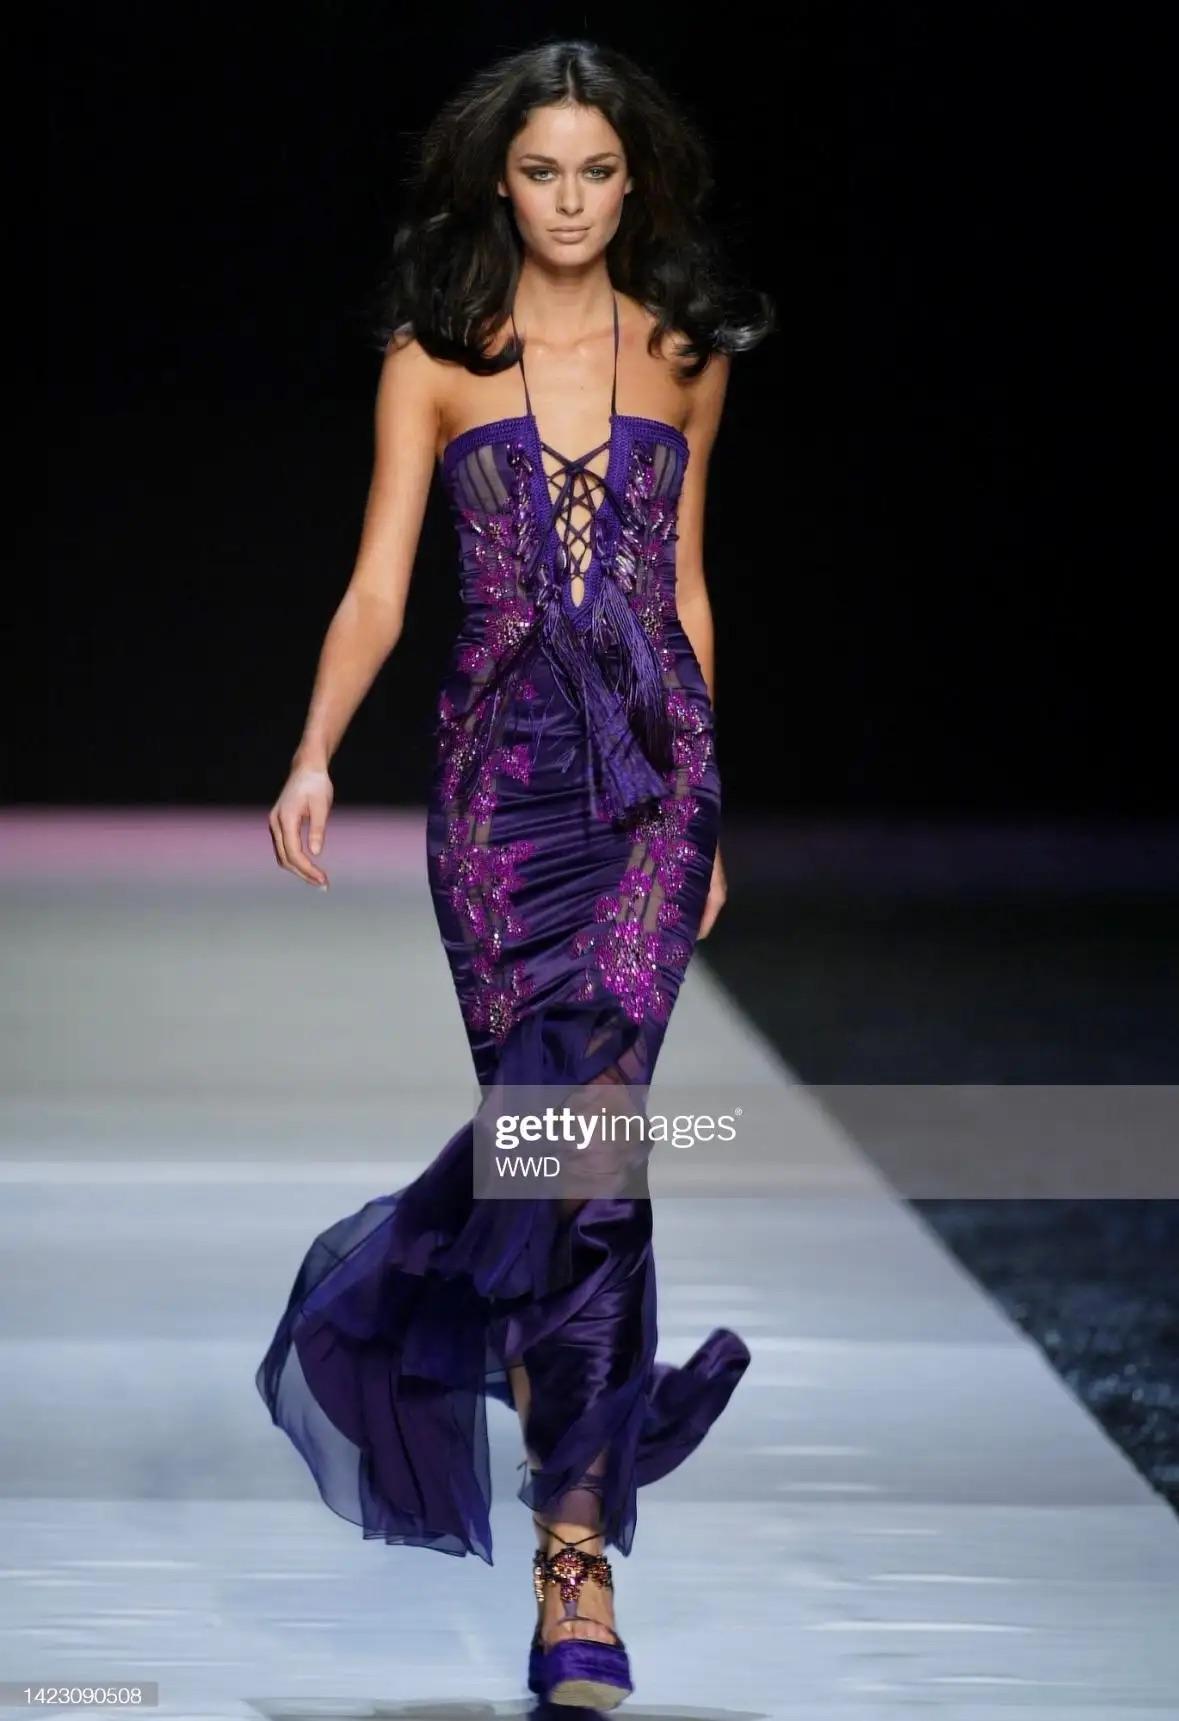 Presenting a stunning purple satin Emanuel Ungaro gown, designed by Giambattista Valli. From the Spring/Summer 2005 collection, a version of this dress debuted on the season’s runway as look 45, modeled by Nicole Trunfio. This fabulous spaghetti